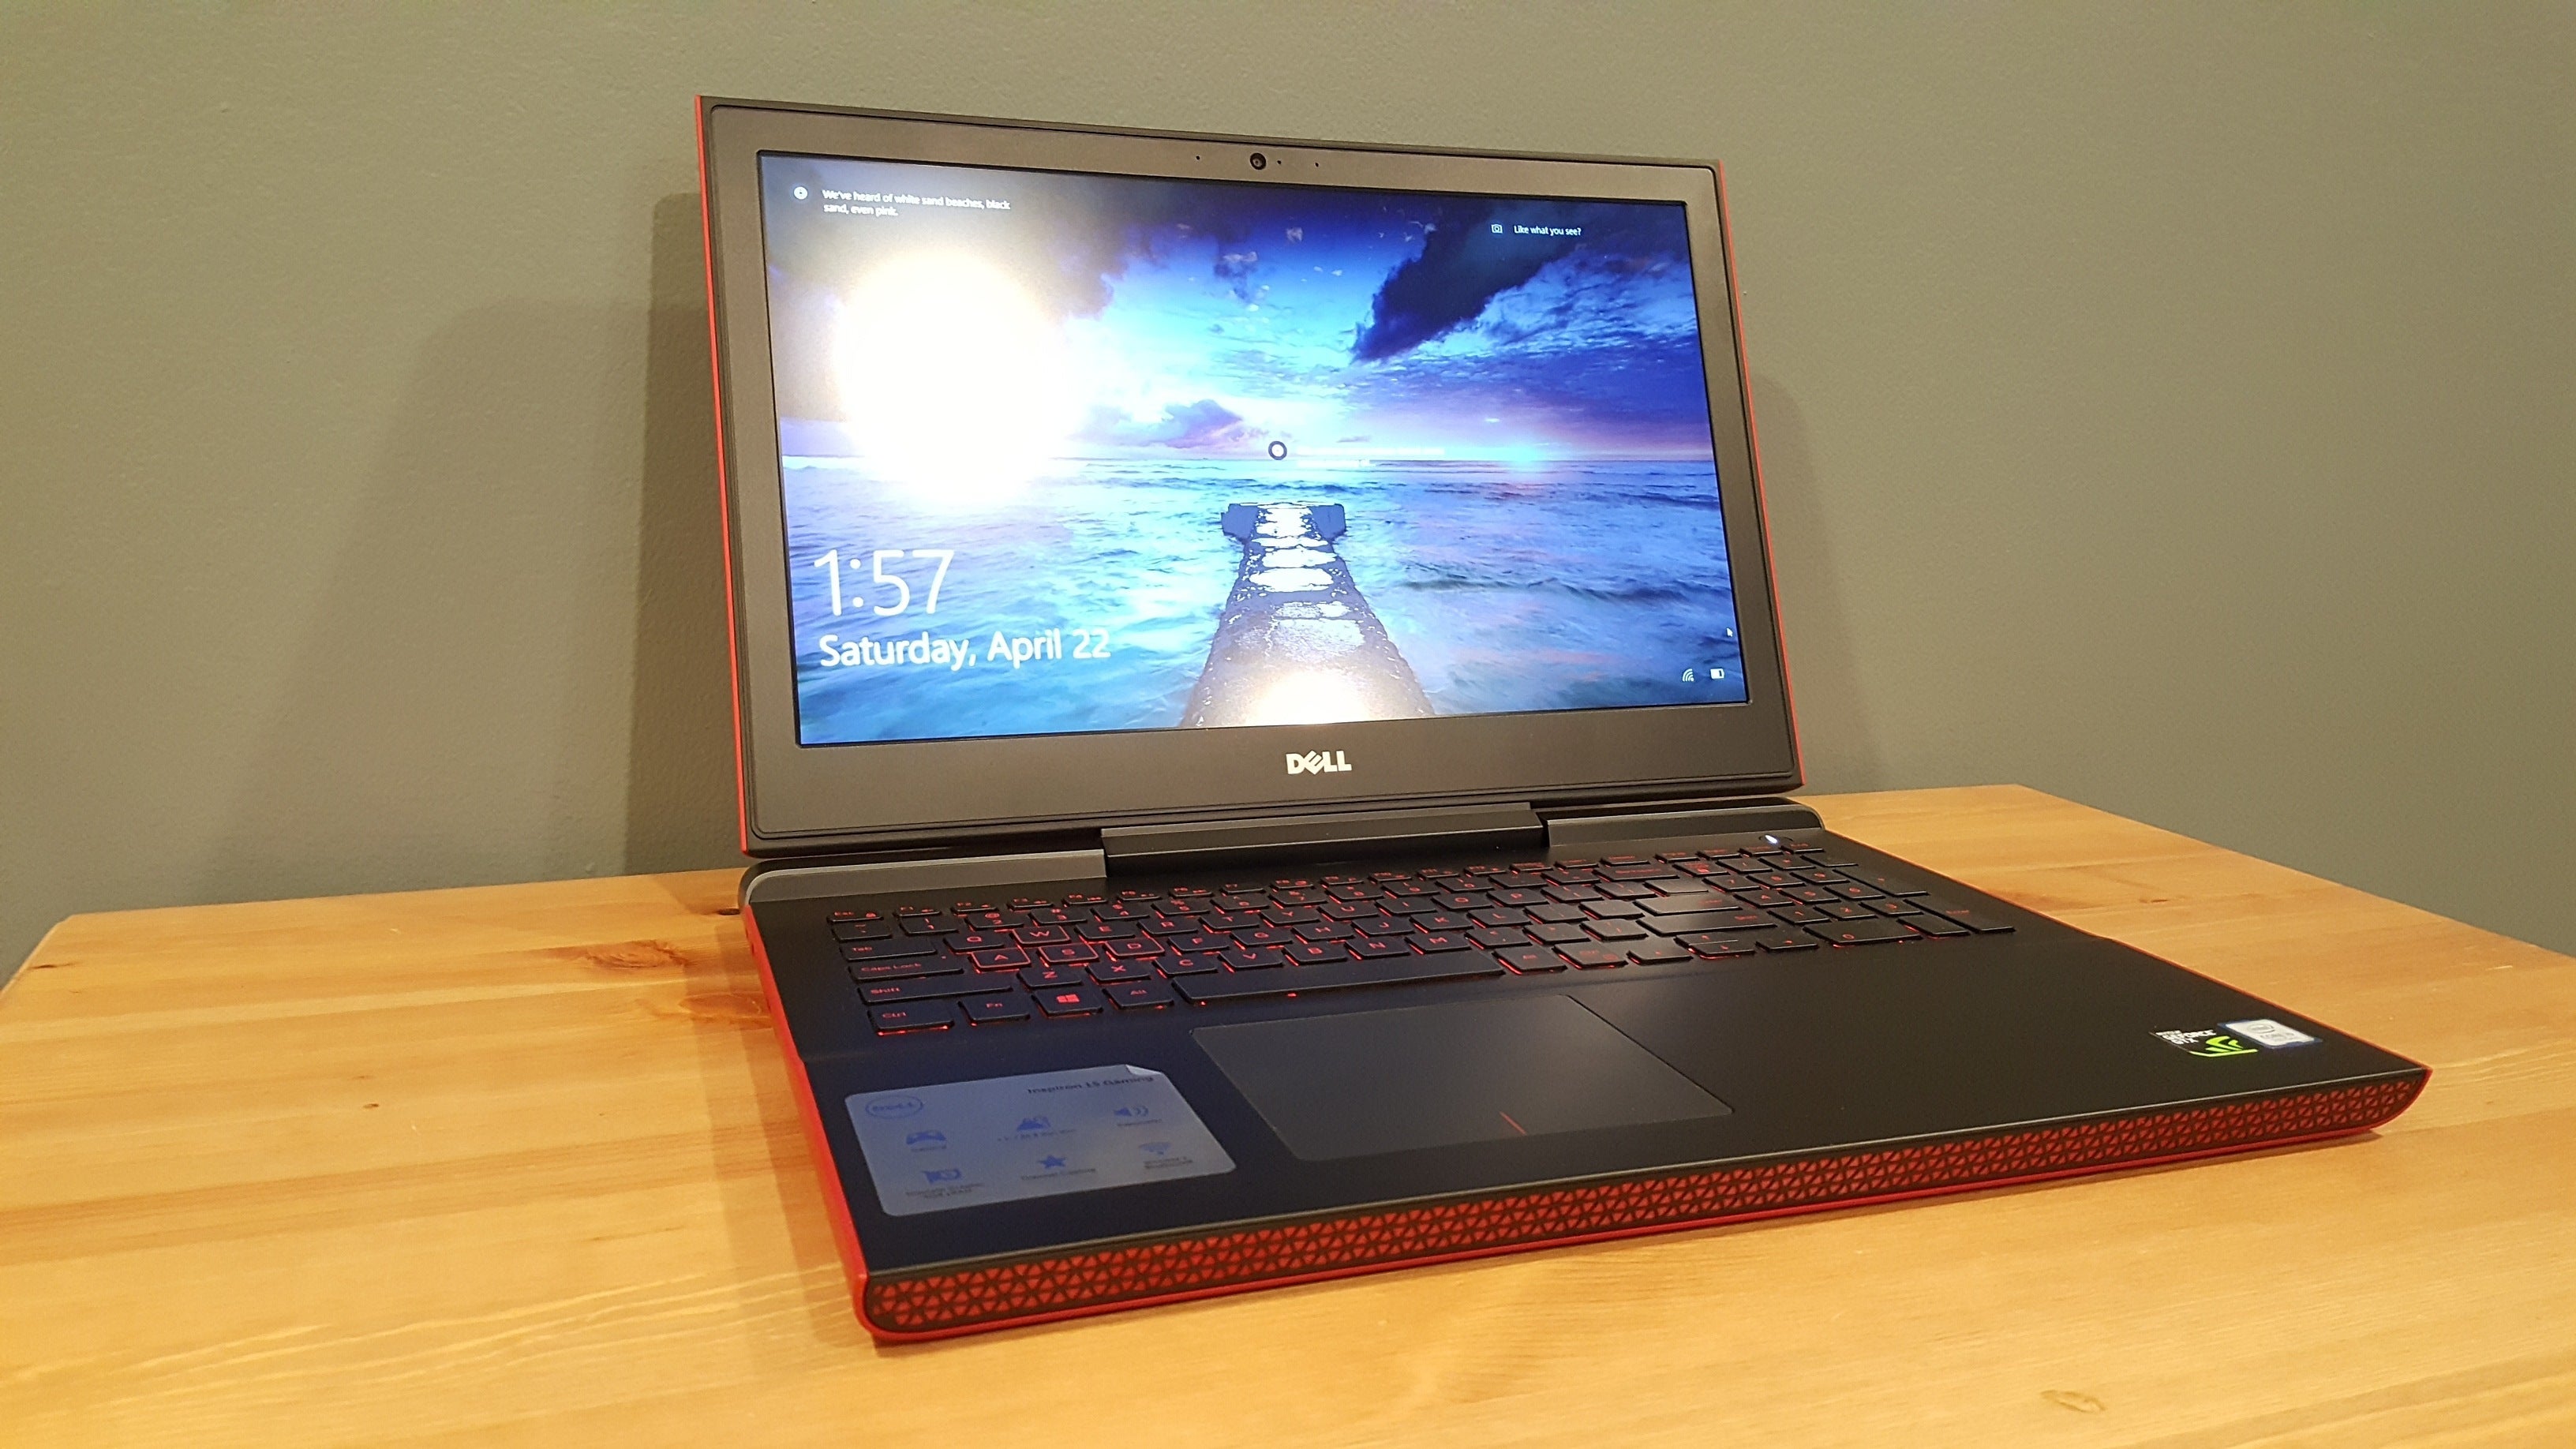 Dell Inspiron 15 7000 review: A gaming laptop at a decidedly non-gaming